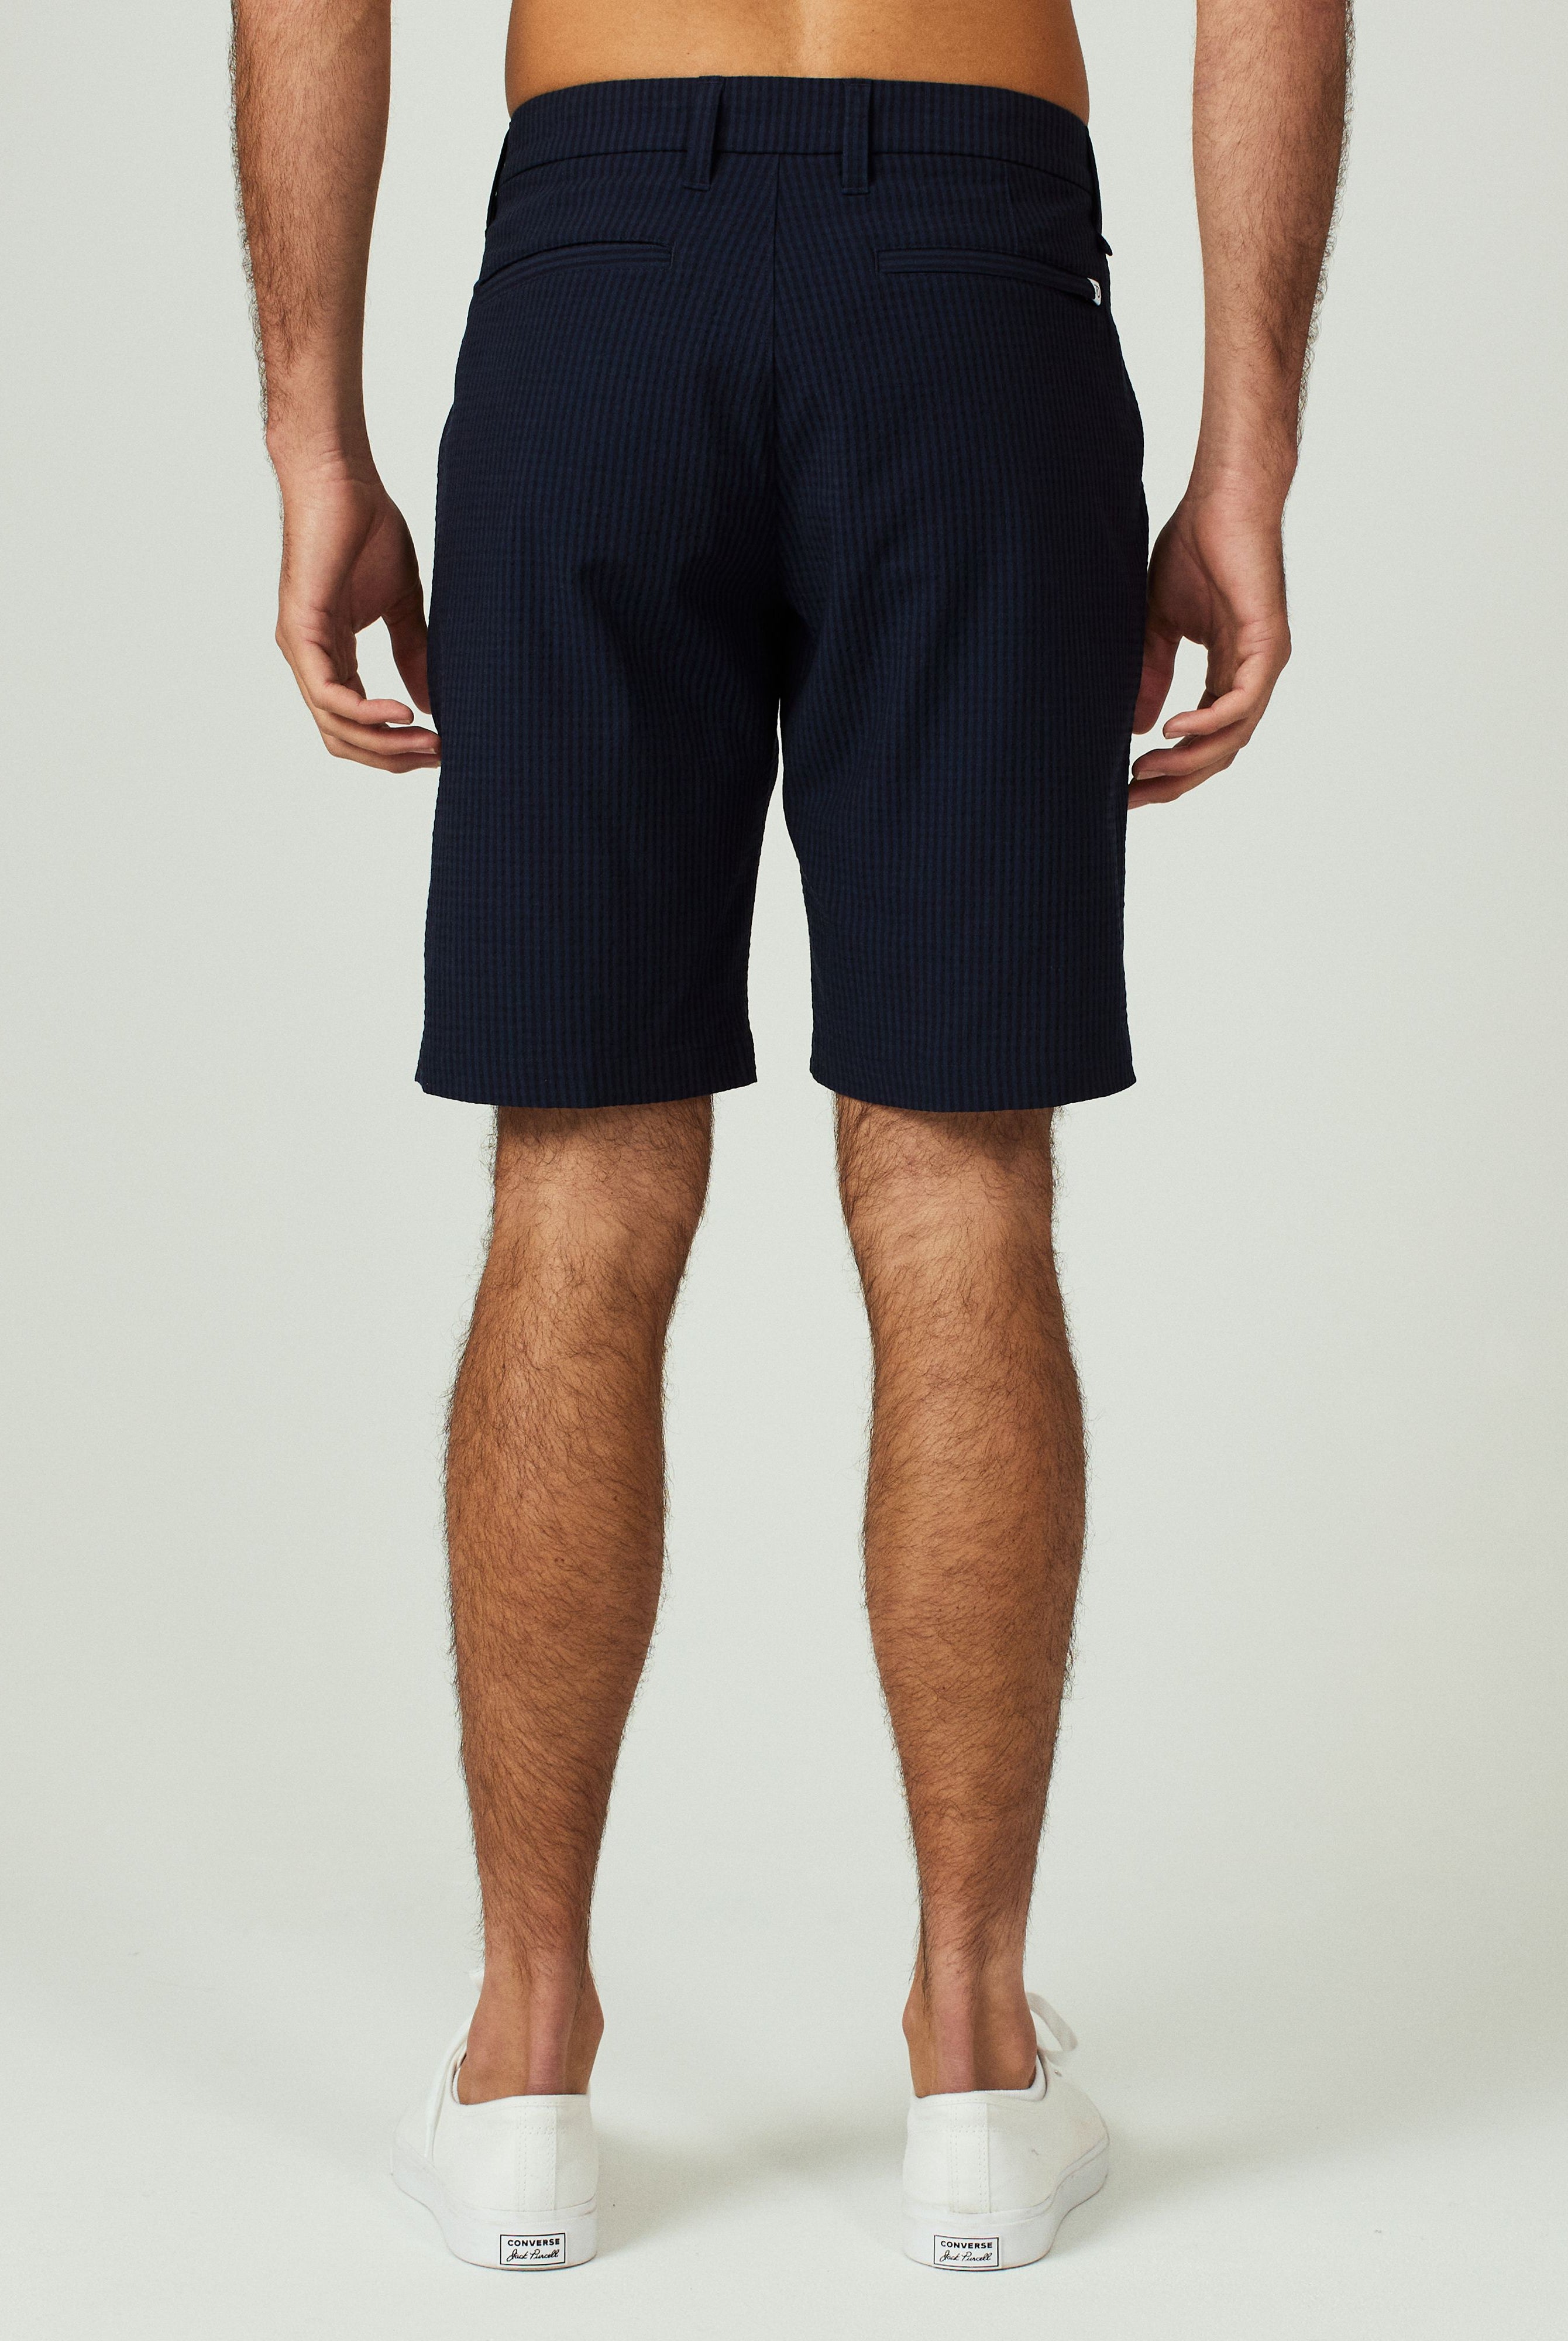 La Jolla Shorts-Men's Bottoms-Vixen Collection, Day Spa and Women's Boutique Located in Seattle, Washington